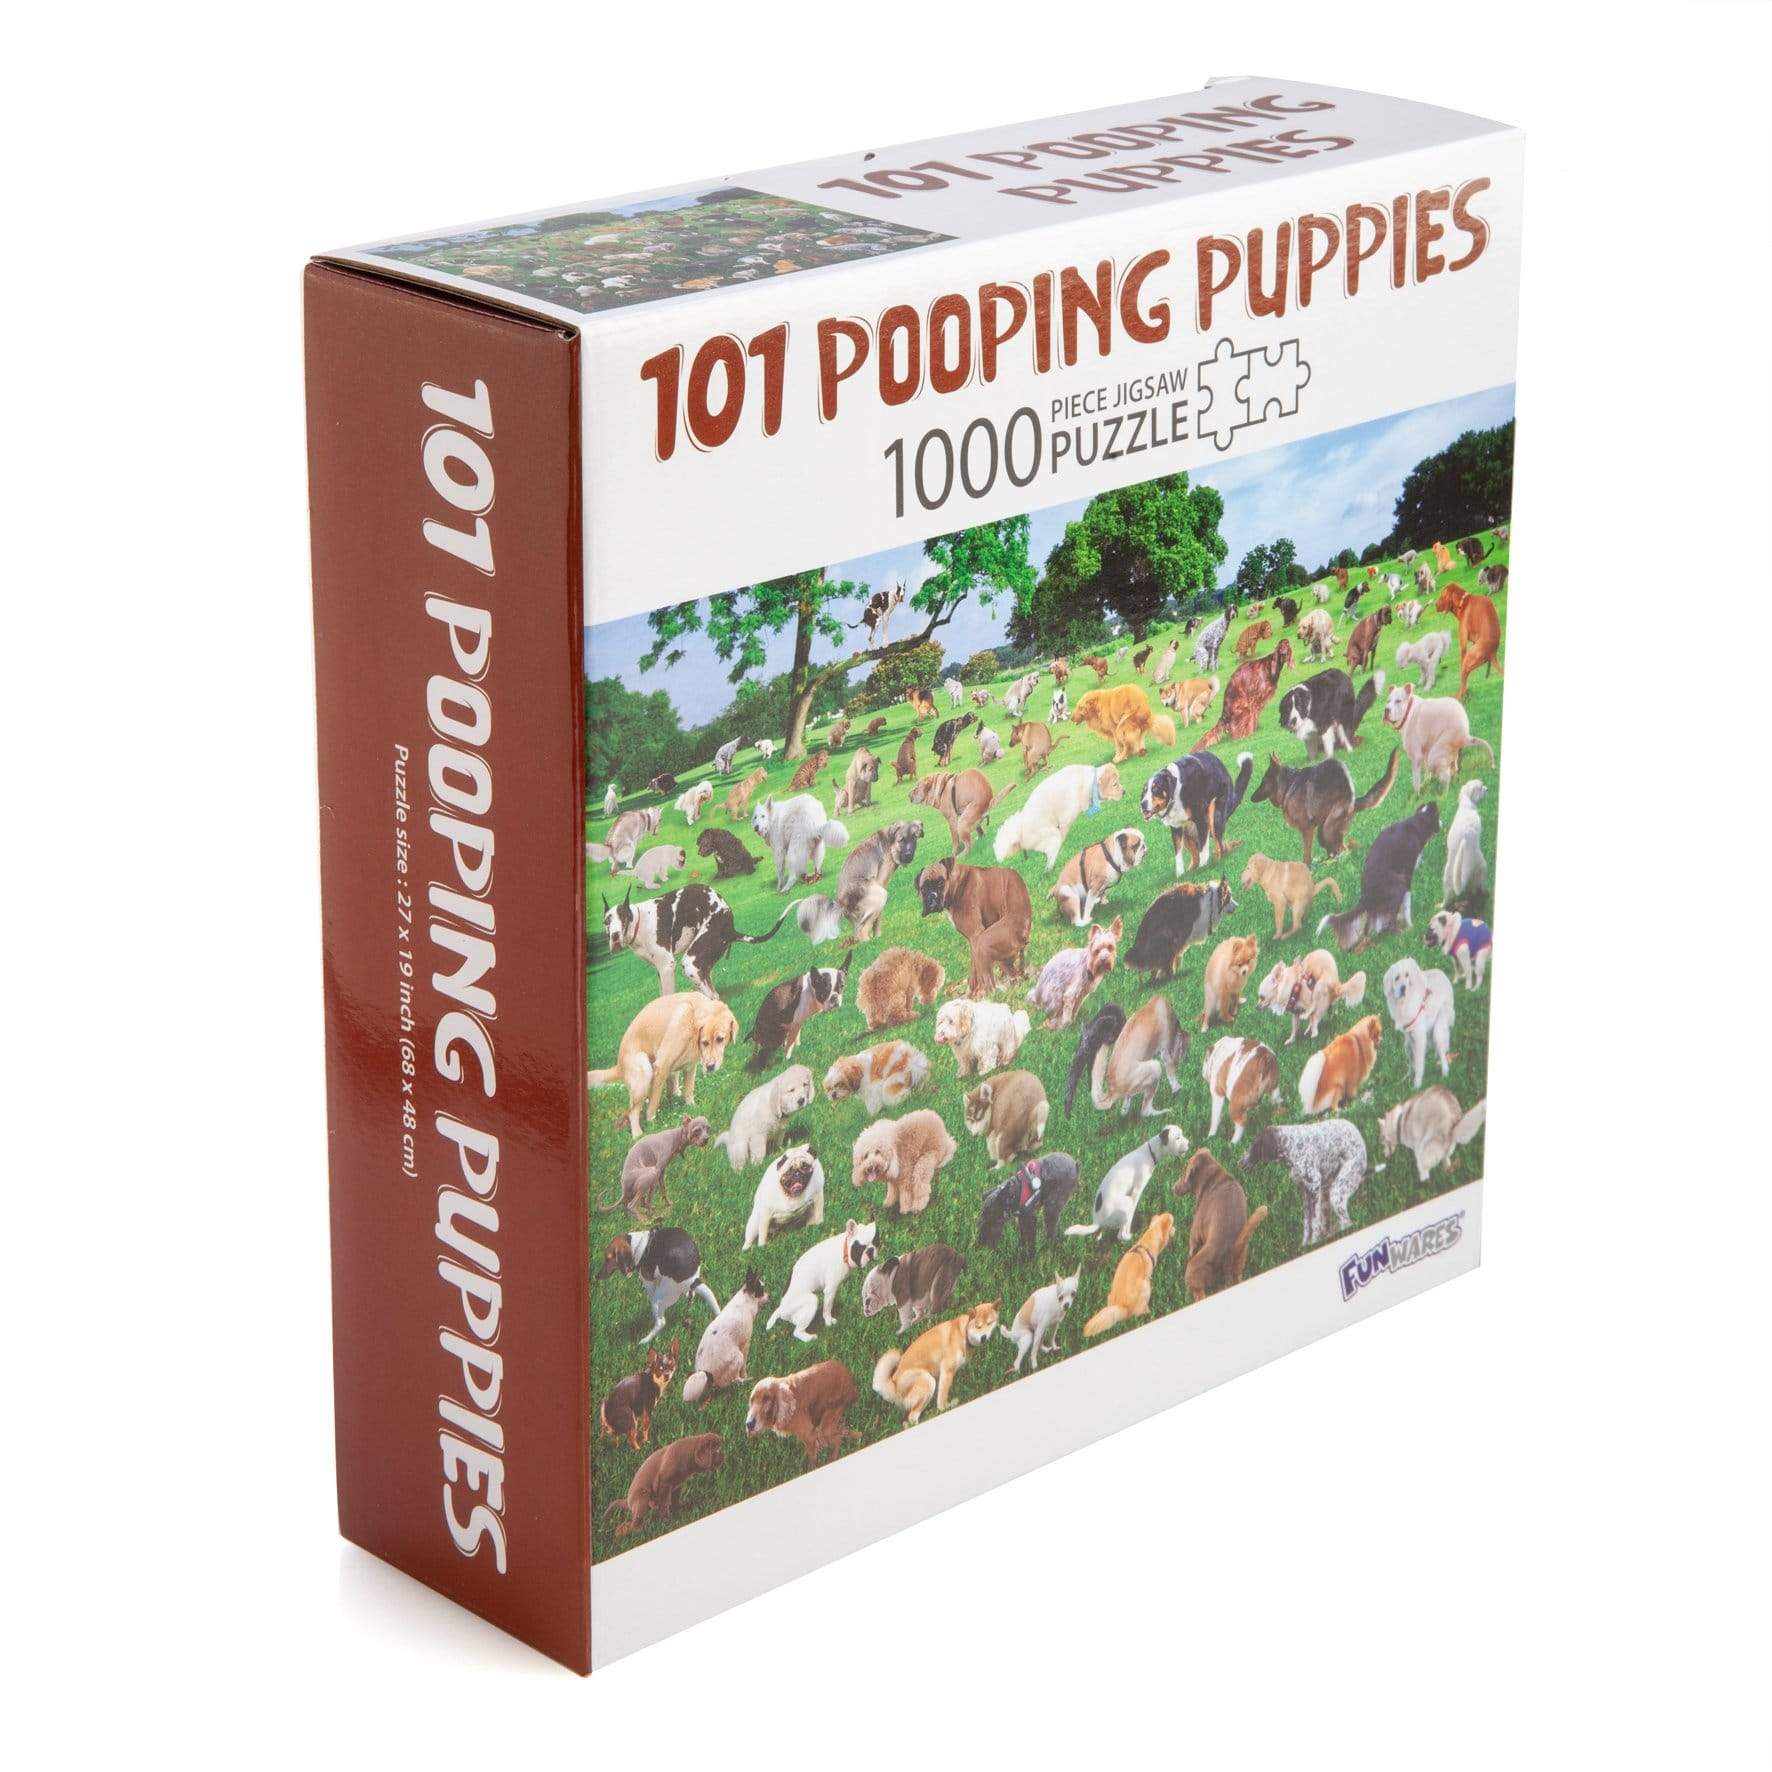 TIGC The Inappropriate Gift Co Pooping Puppies Jigsaw Puzzle